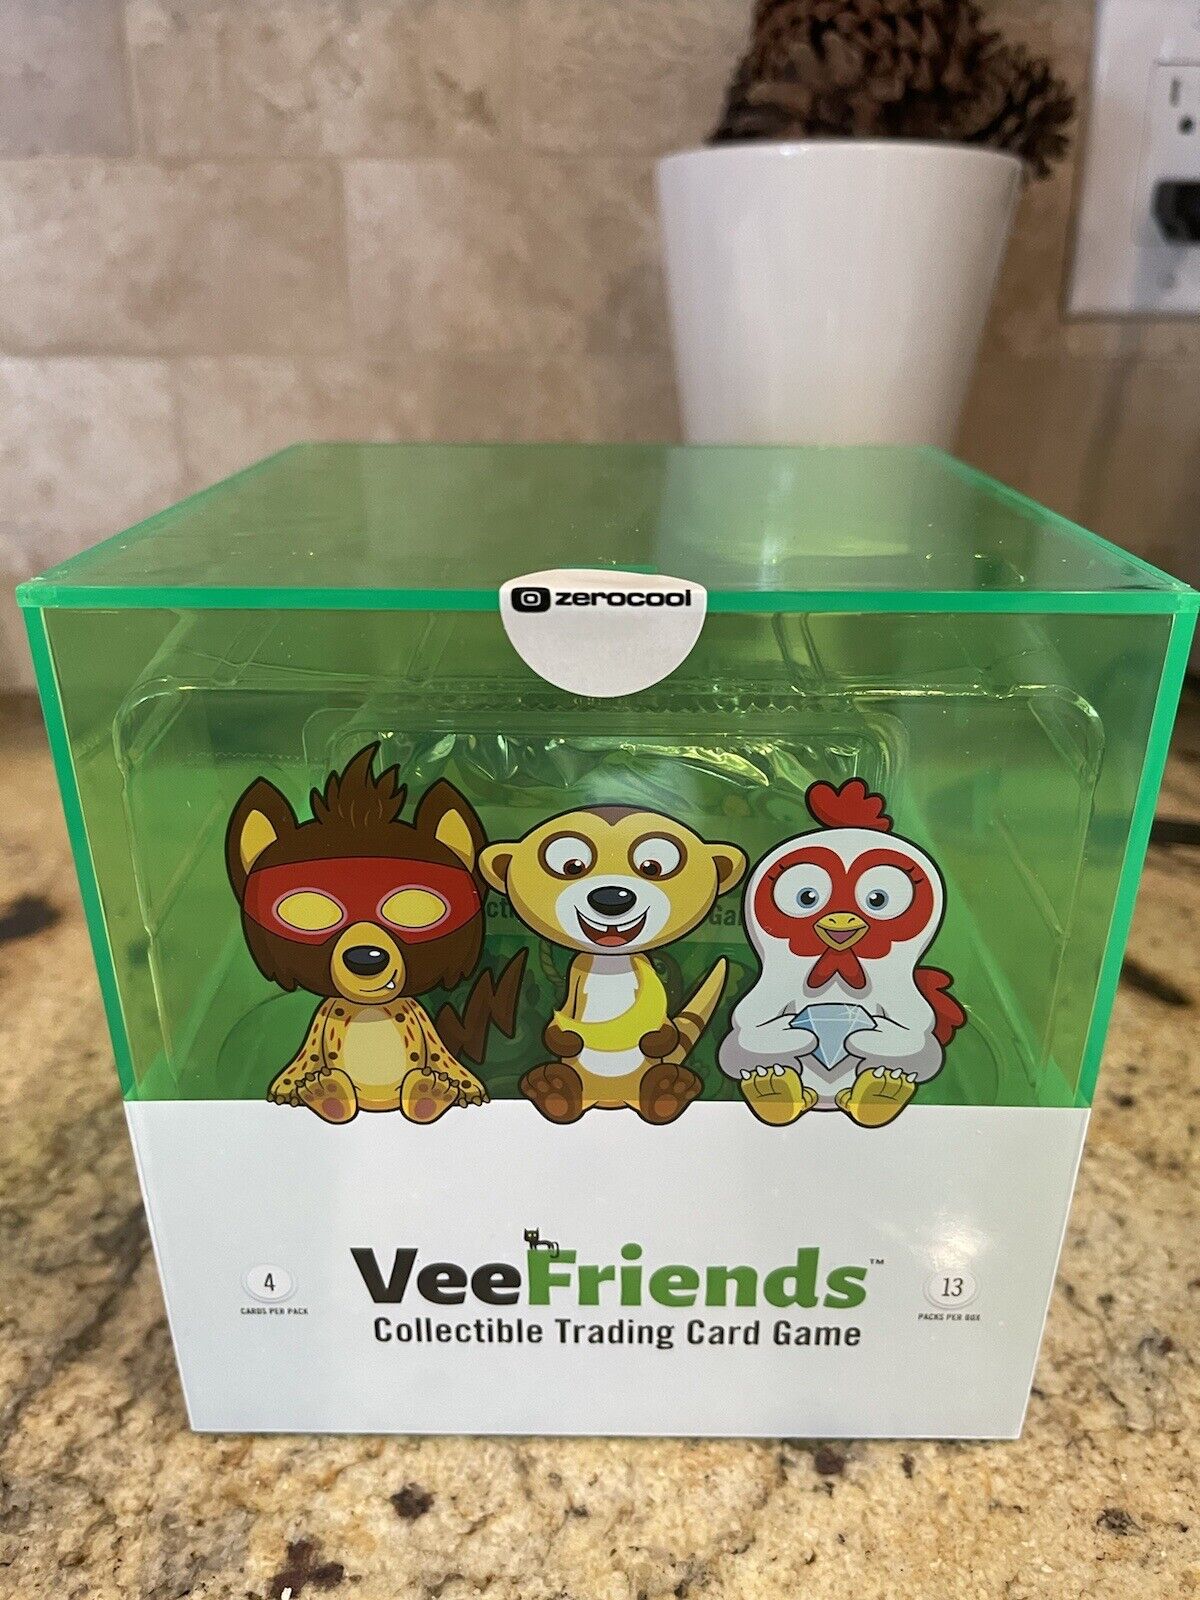 Veefriends Series 2 Trading Cards “Compete And Collect” Web3 Edition ZeroCool